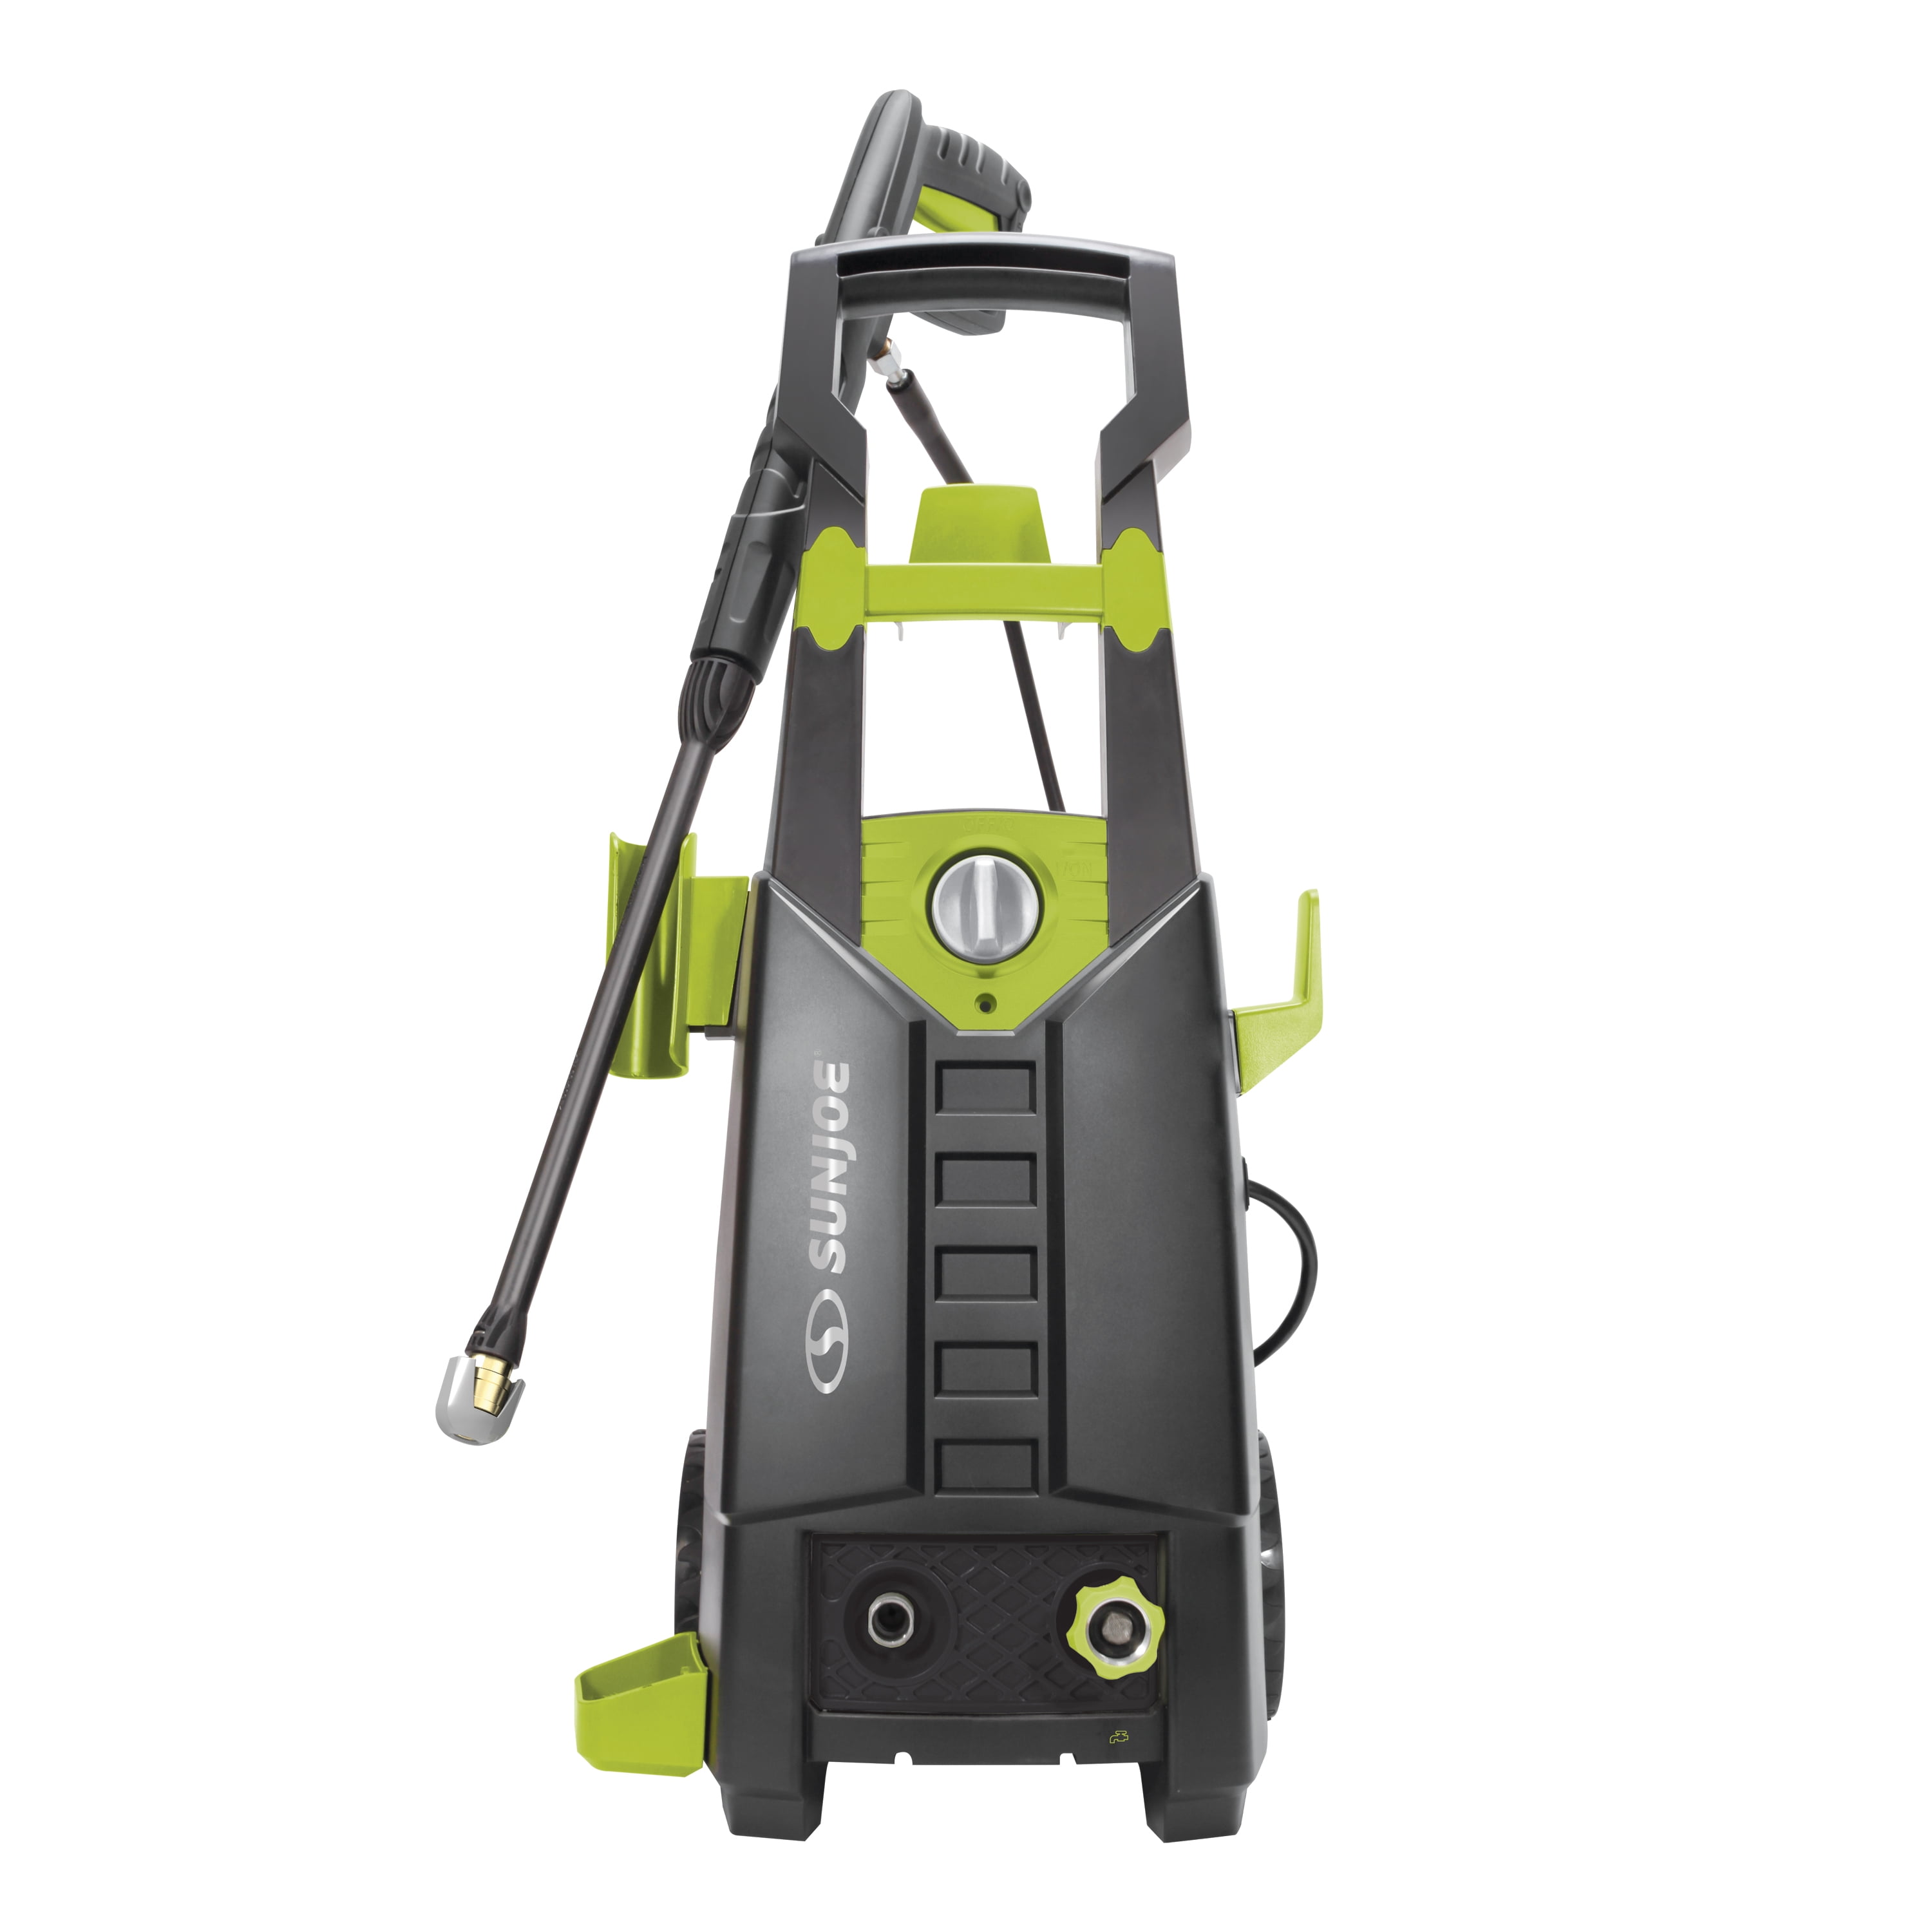 Sun Joe SPX2688-MAX Electric Pressure Washer, 13-Amp, Foam Cannon, Quick-Connect Tips - image 1 of 6